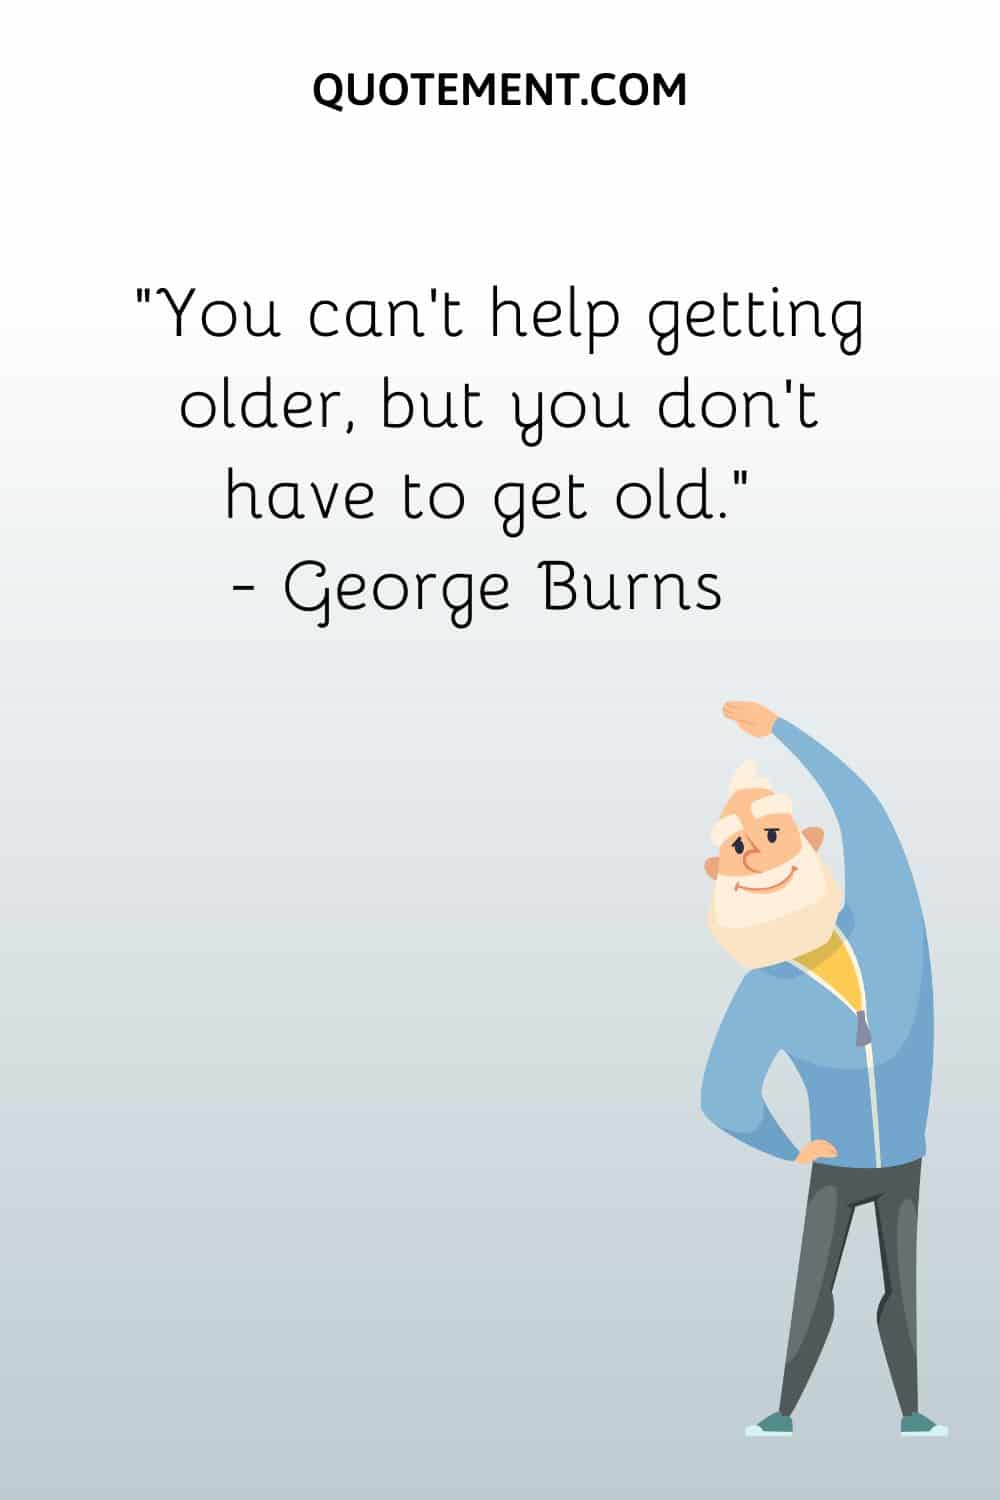 You can’t help getting older, but you don’t have to get old